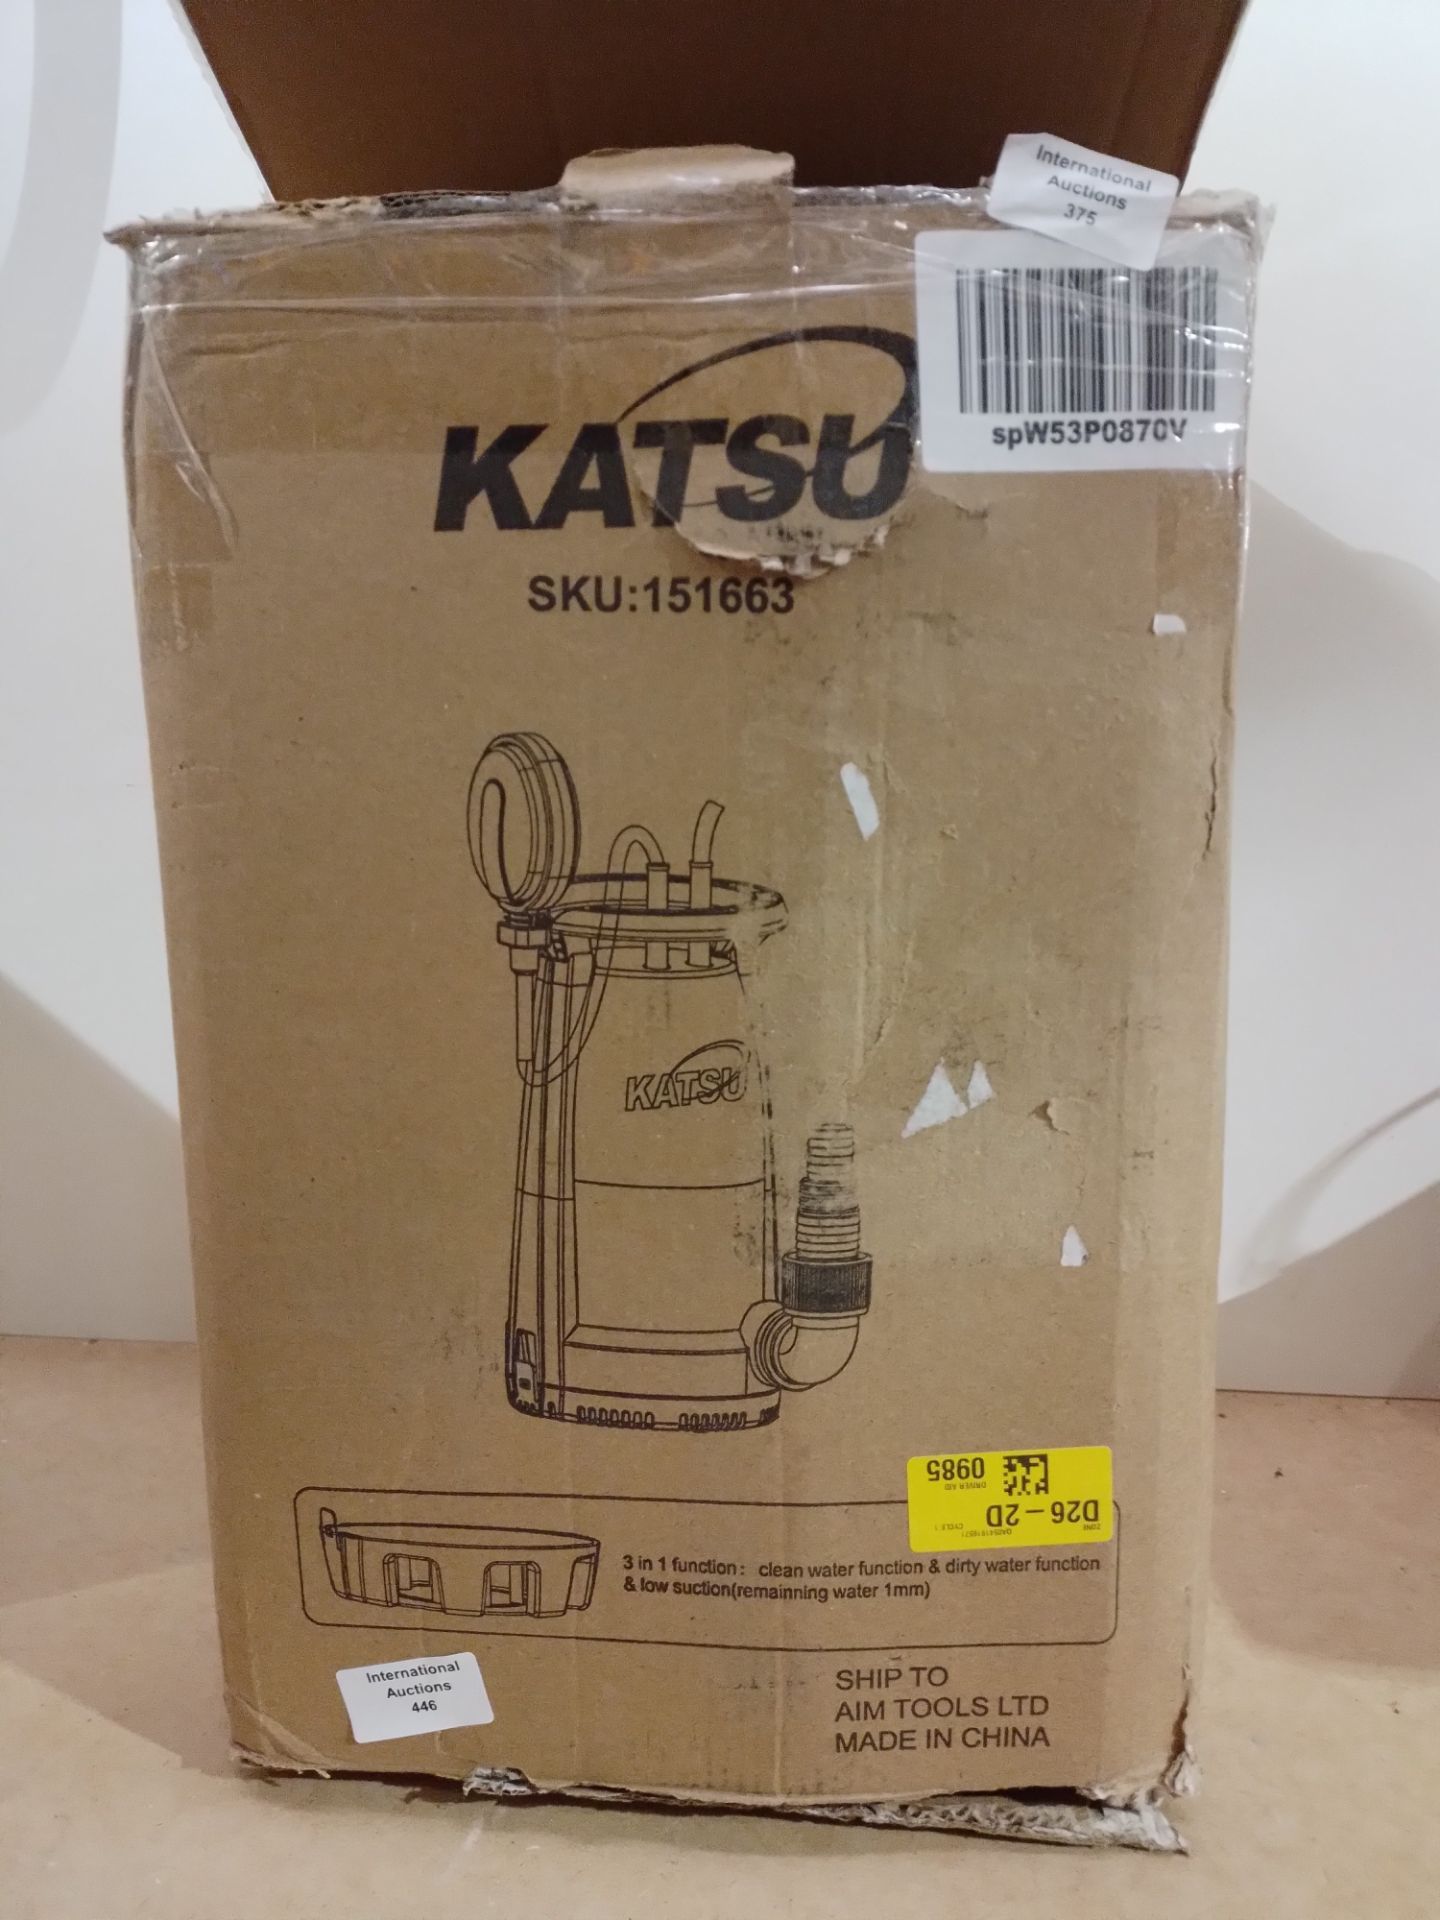 RRP £53.99 KATSU 750W Portable Submersible Pump for Clean and - Image 2 of 2